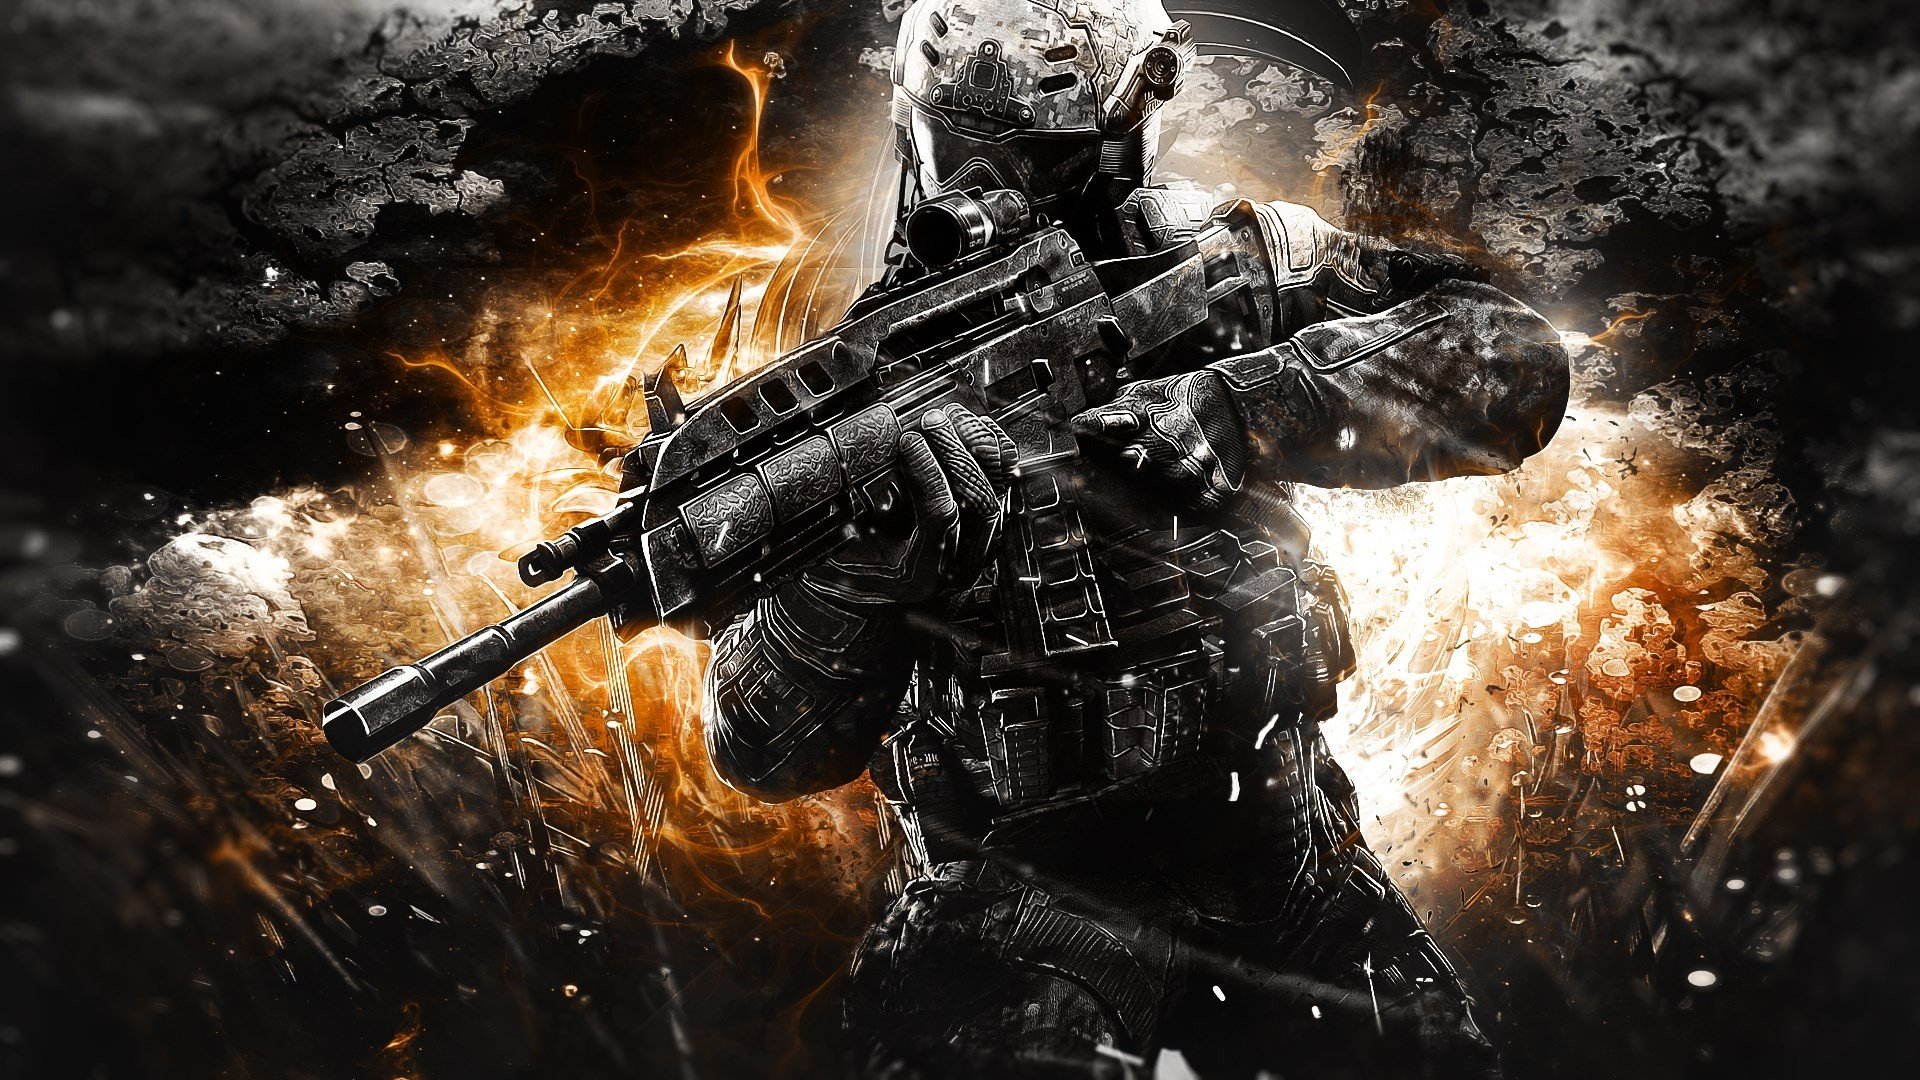  Call  Of Duty  Black Ops 2 wallpapers  1920x1080 Full HD 